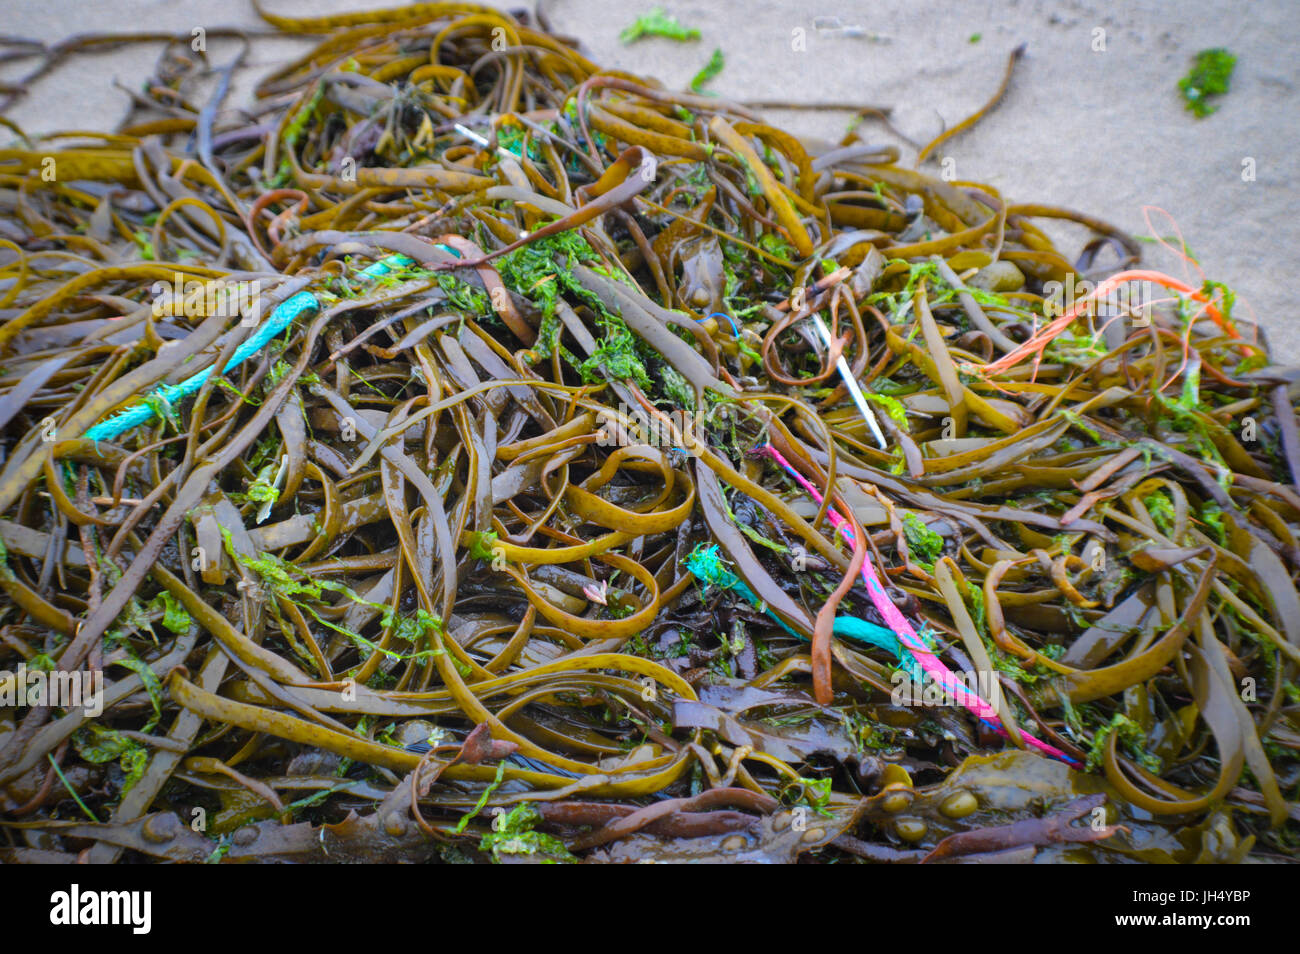 Marine litter (discarded fishing lines) Stock Photo